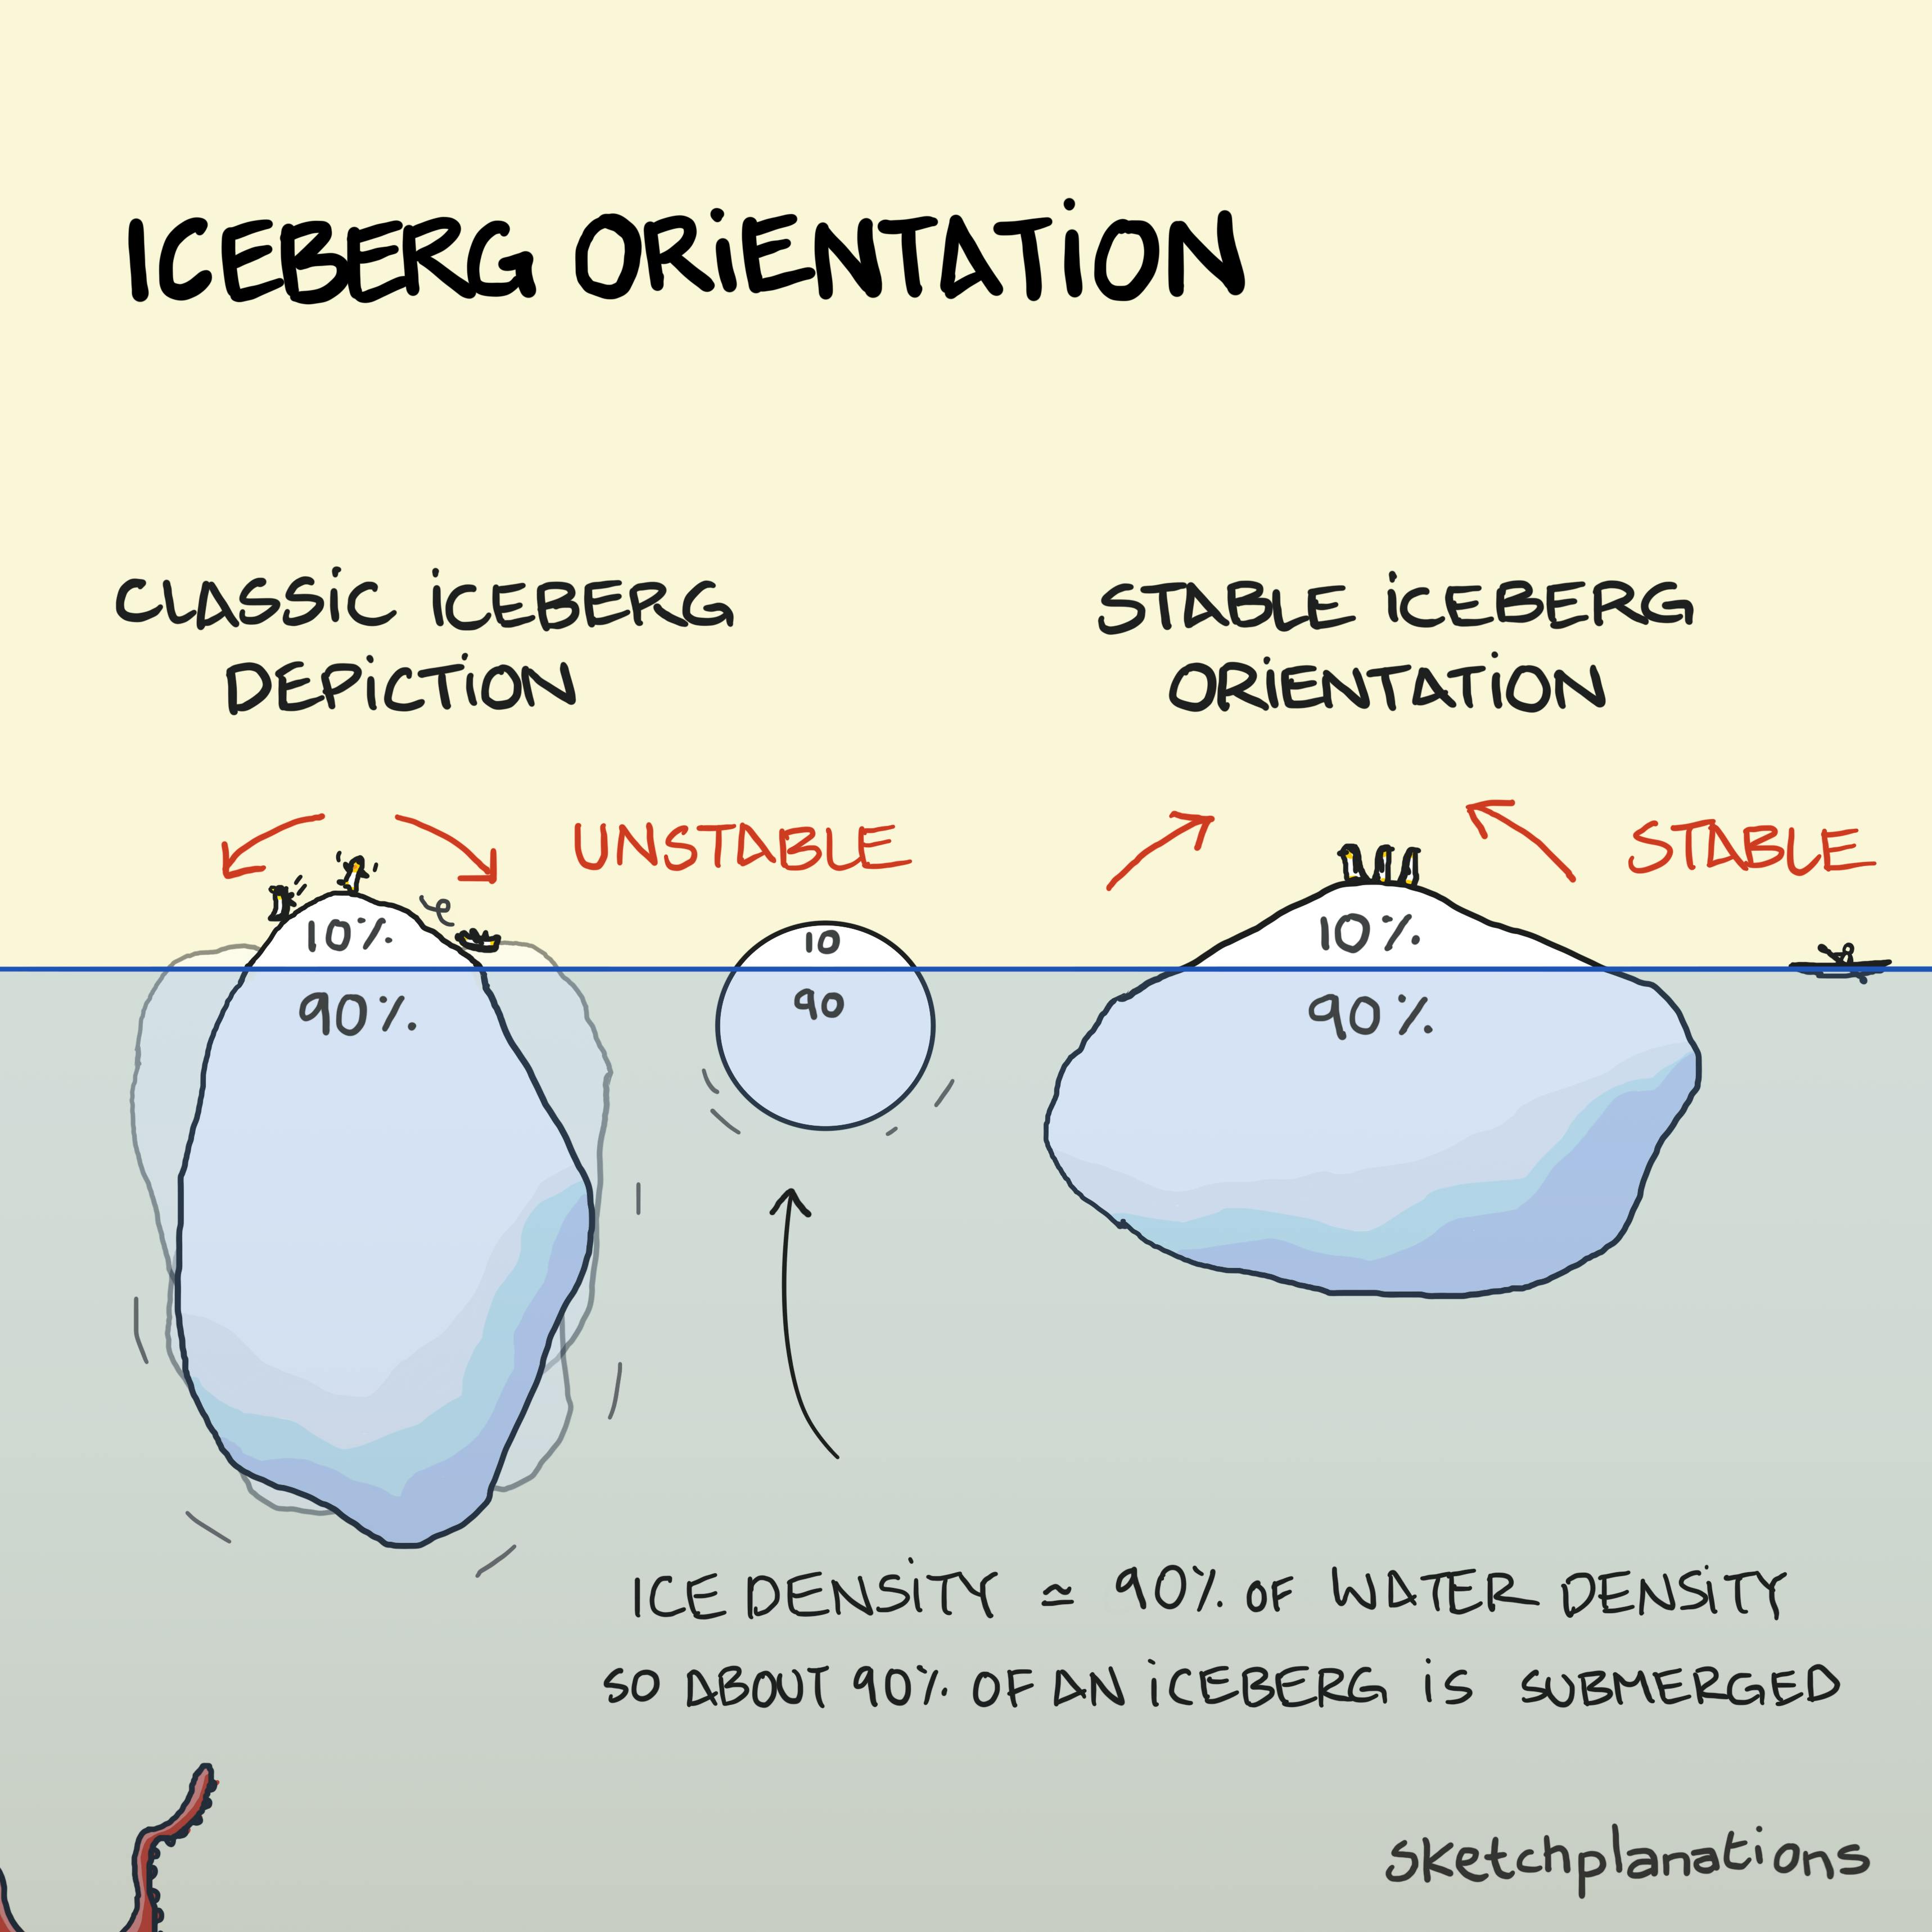 Iceberg floating orientation explained: Icebergs are usually drawn floating vertically, while a stable iceberg orientation is usually on its side